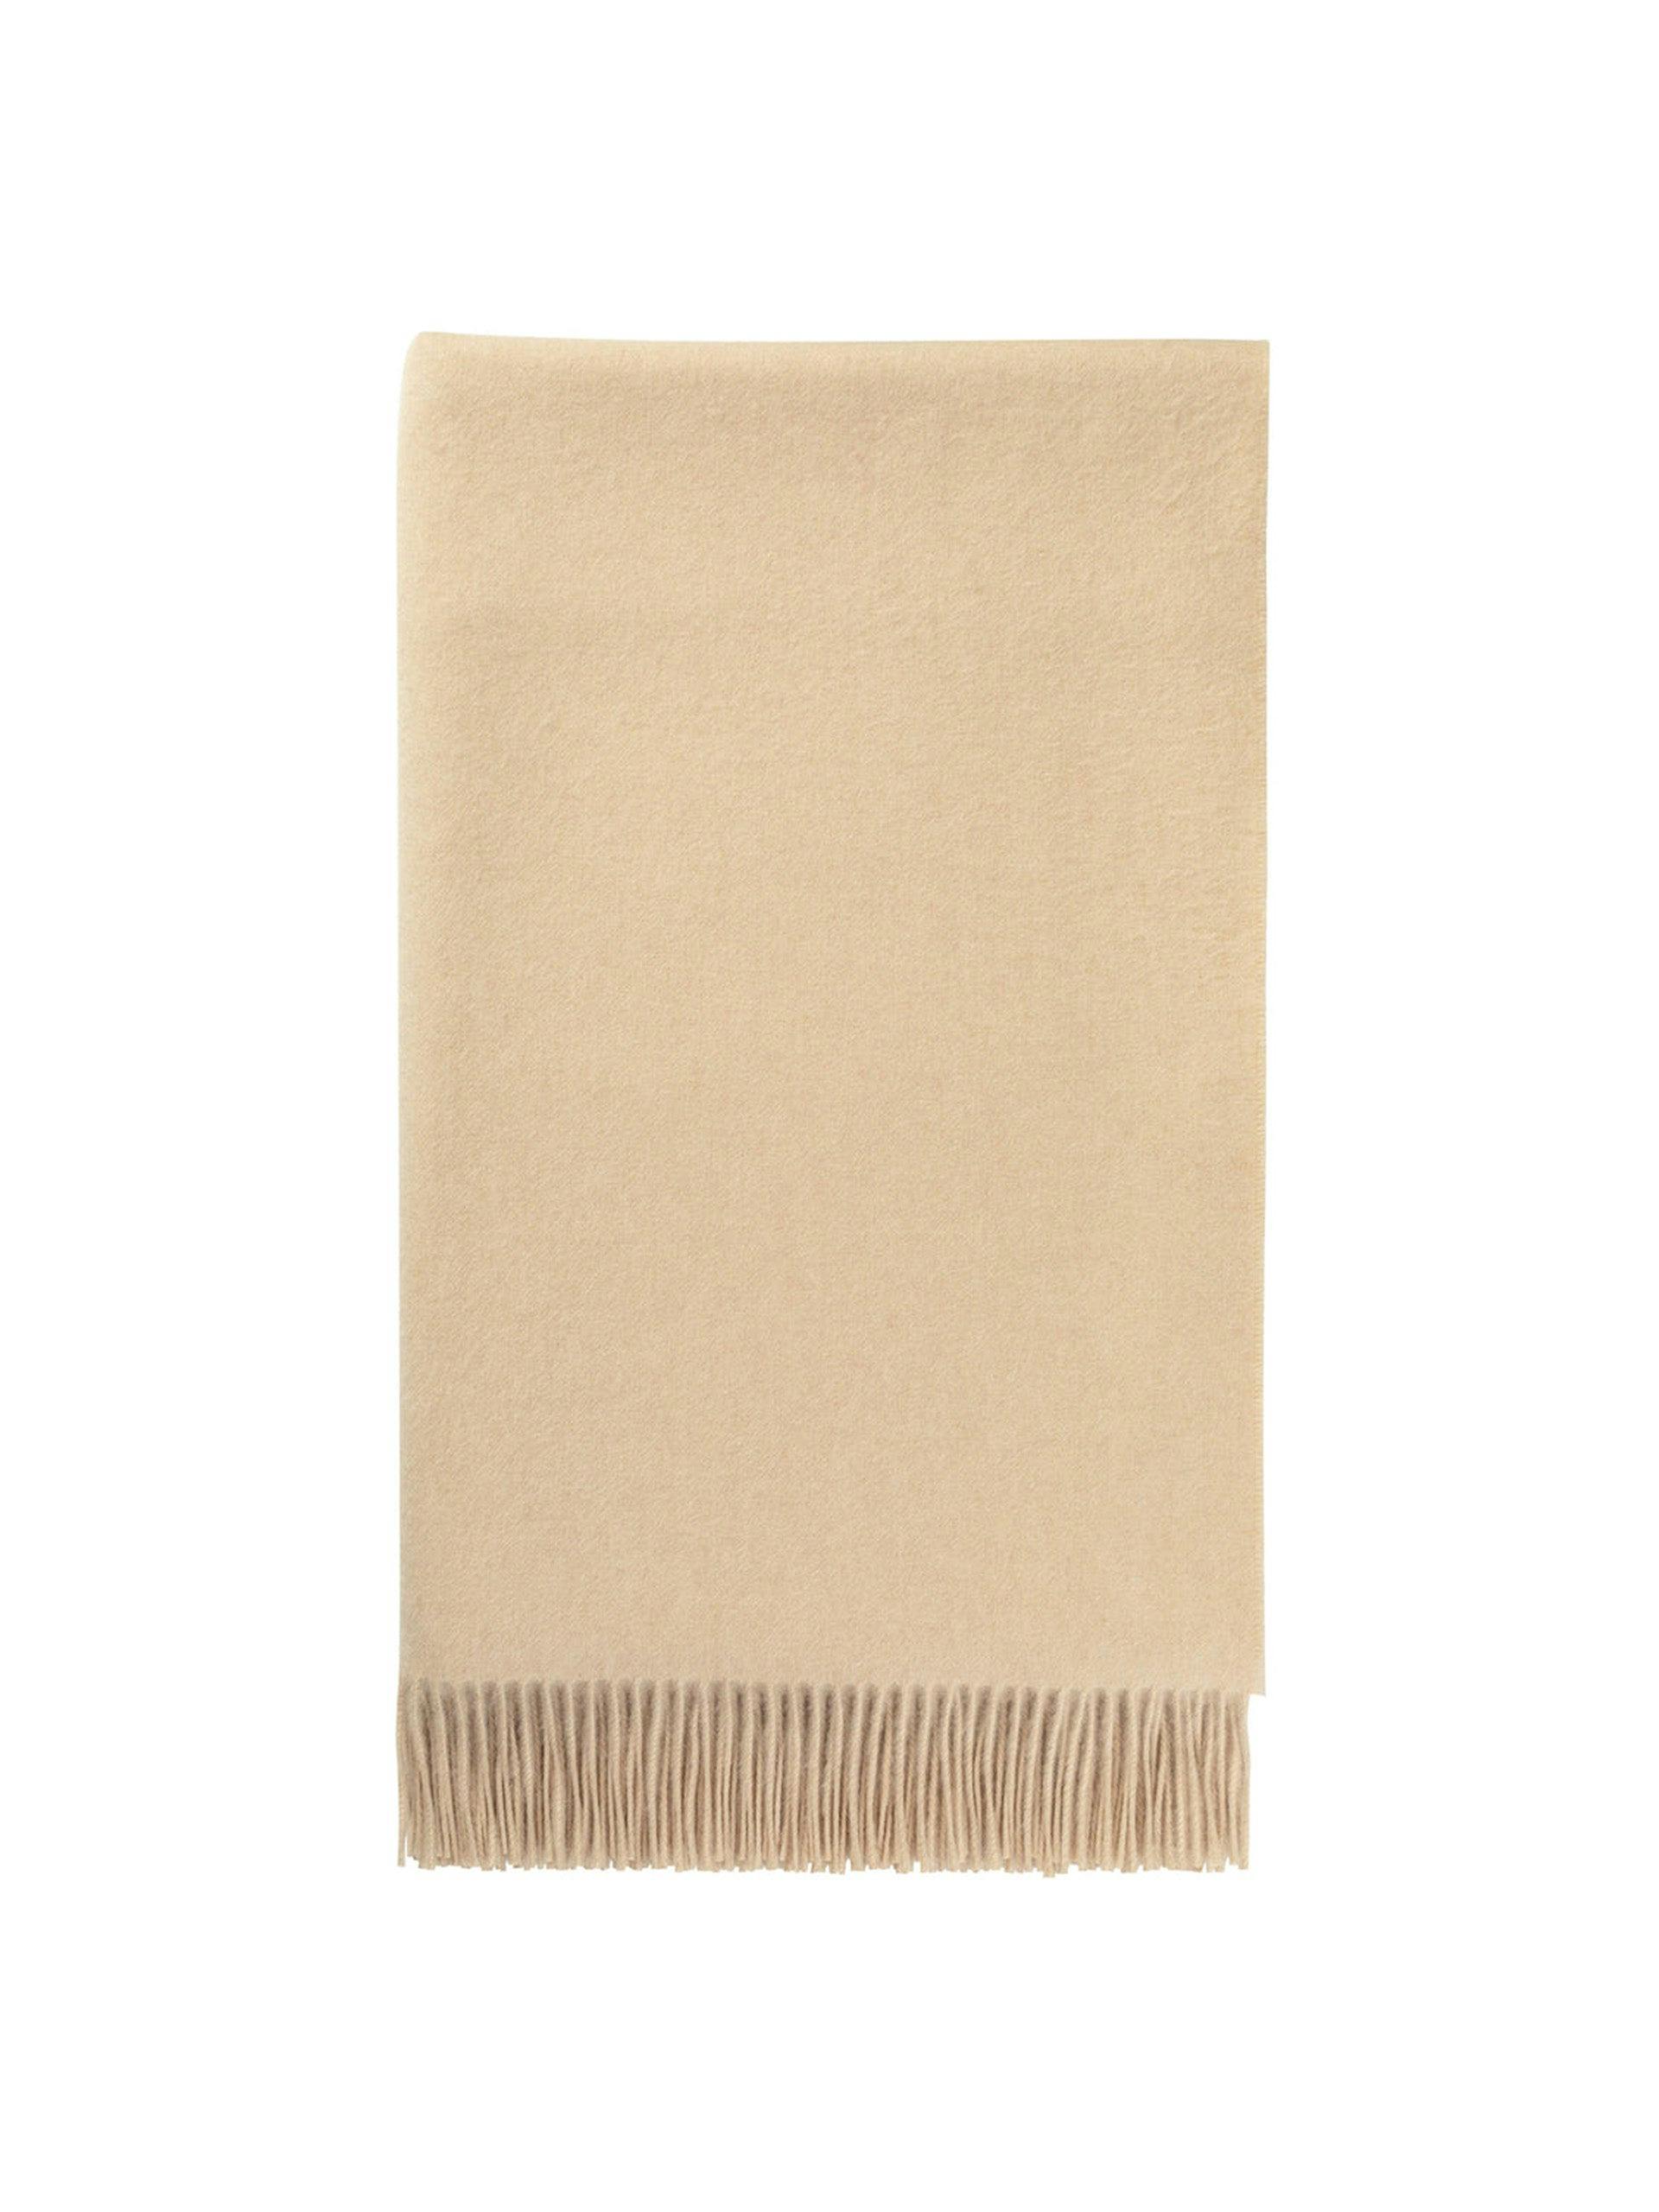 Plain cashmere bed throw